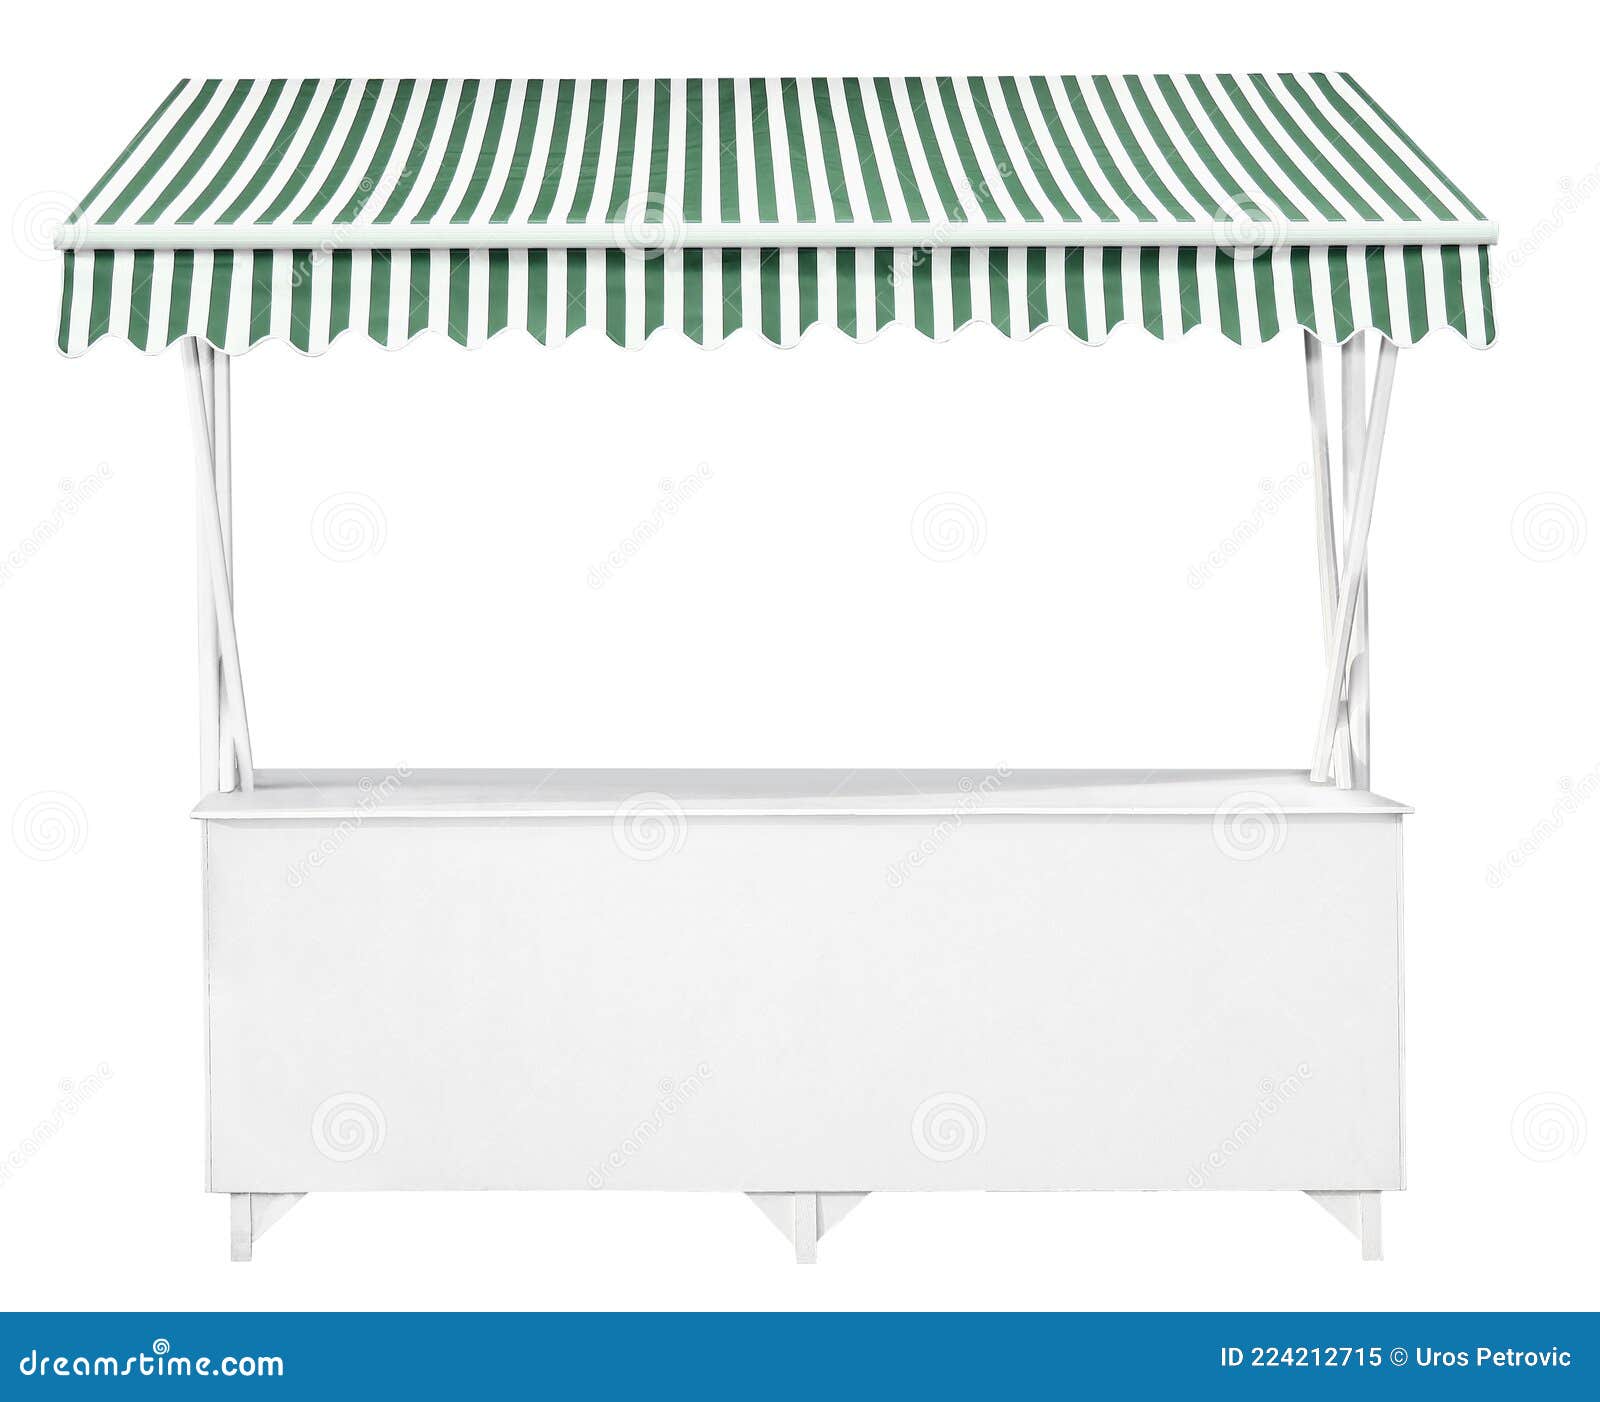 white market stall with green striped awning